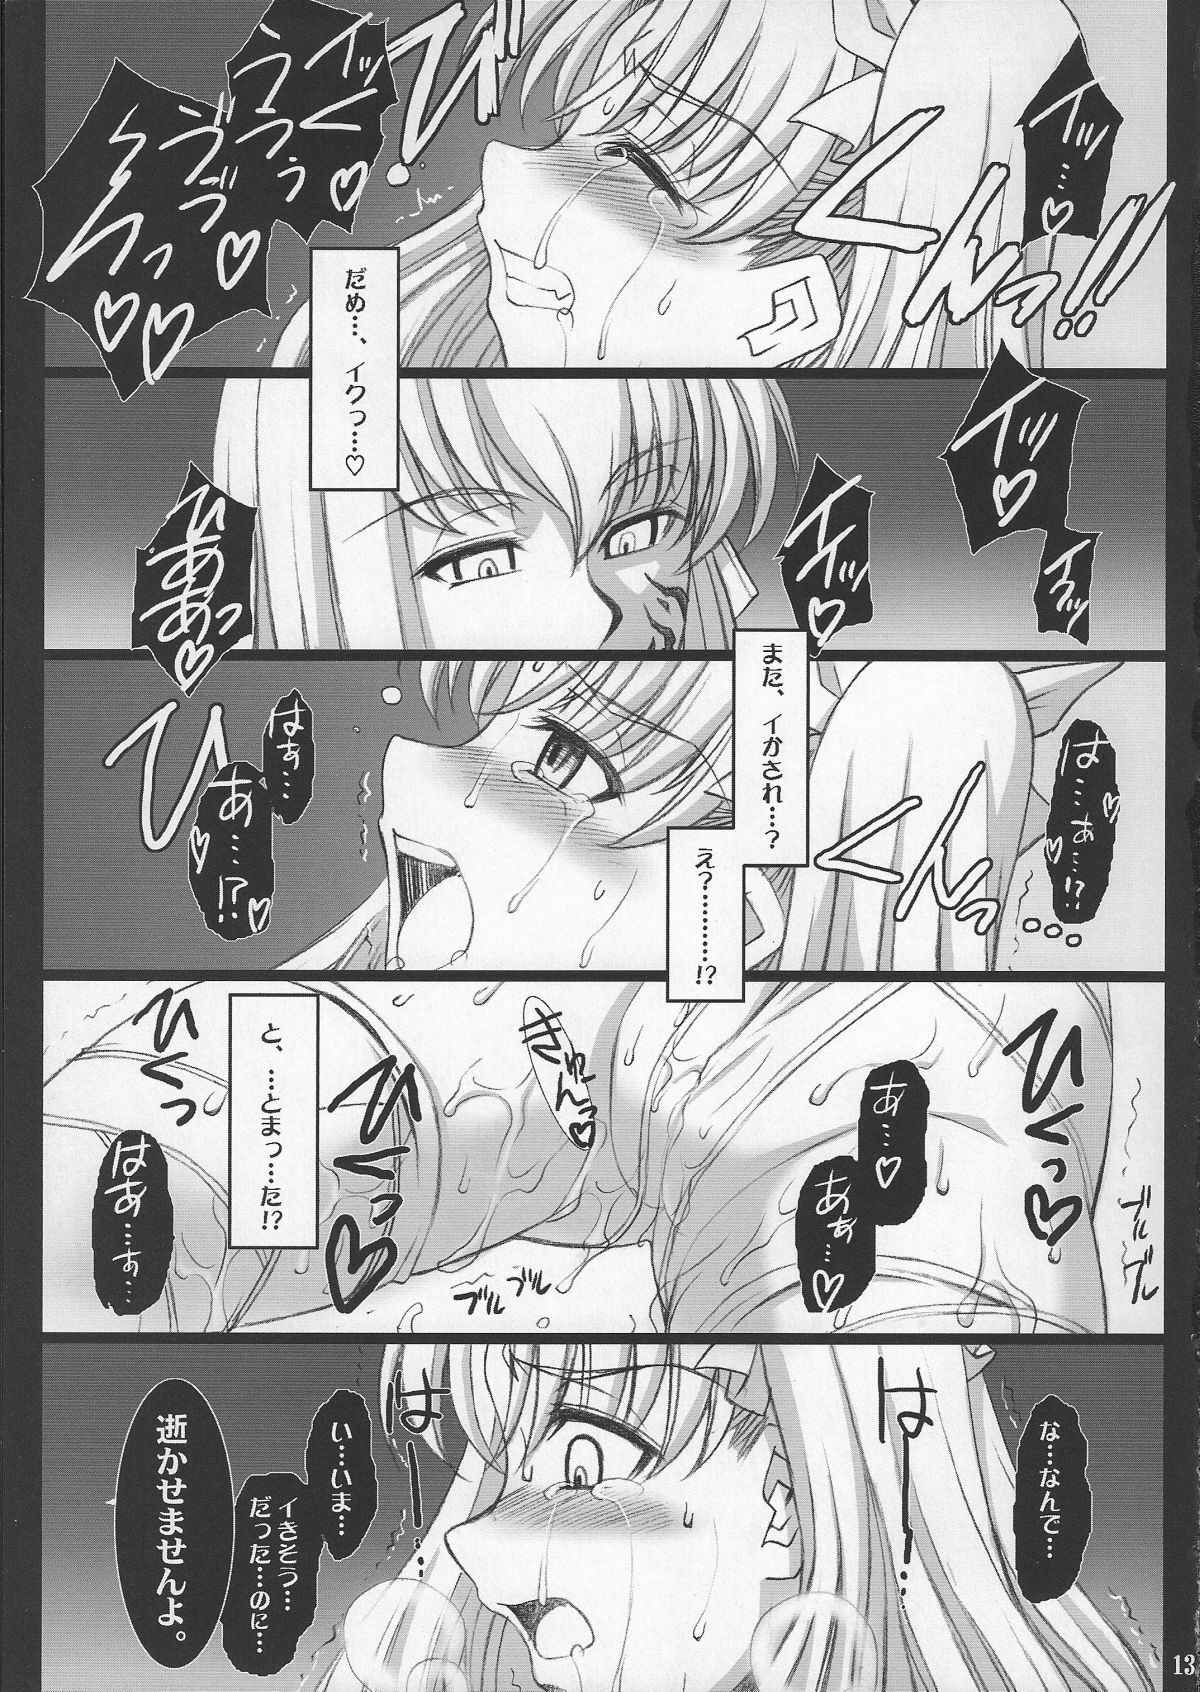 (COMIC1☆2) [H.B (B-RIVER)] Red Degeneration -DAY/3- (Fate/stay night) page 12 full